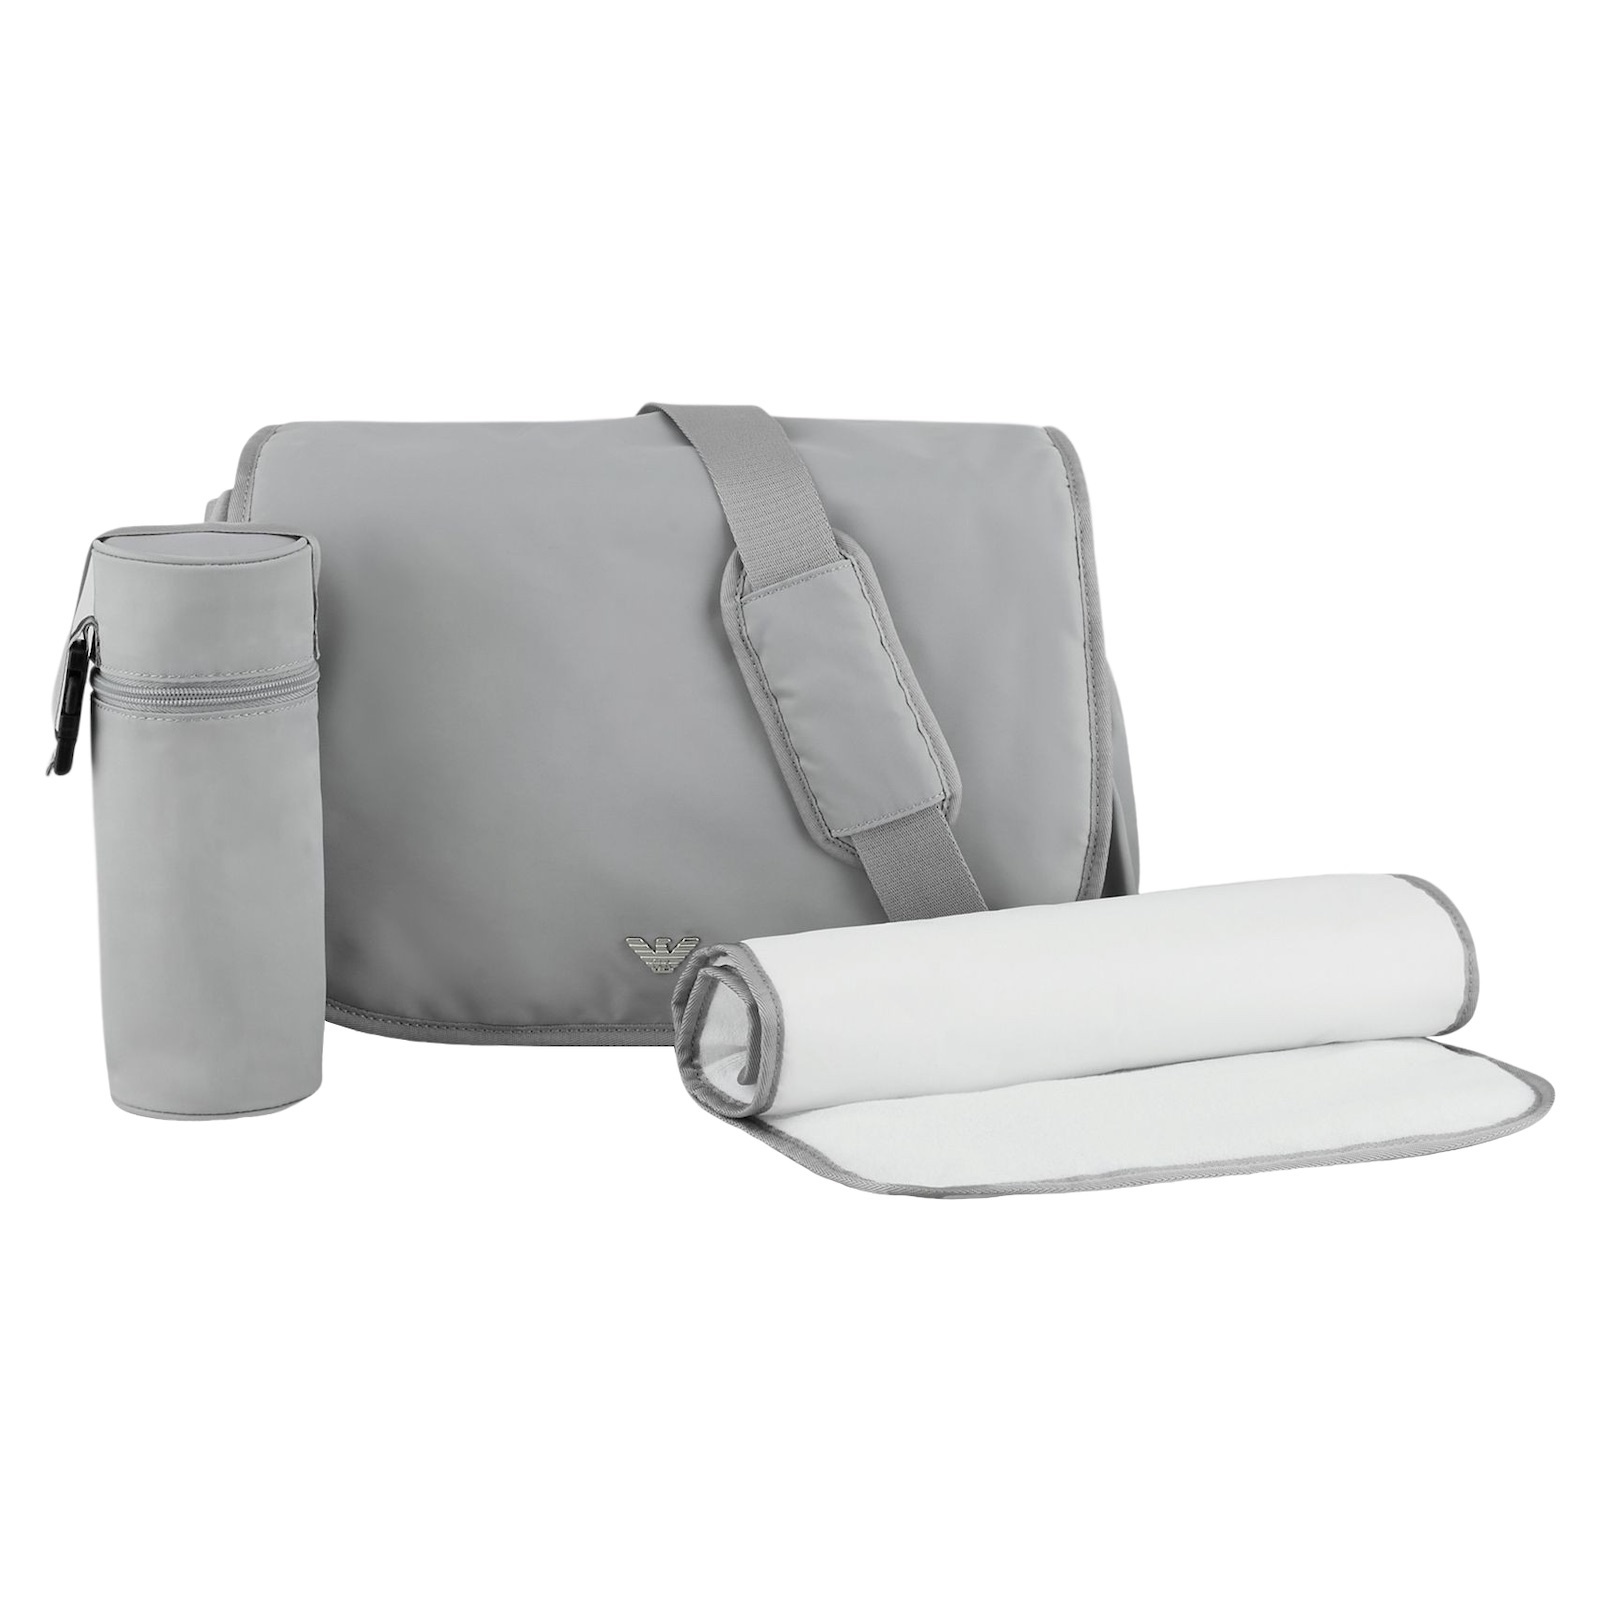 Emporio Armani grey changing bag with changing mat - Lolly Pop Kindermode